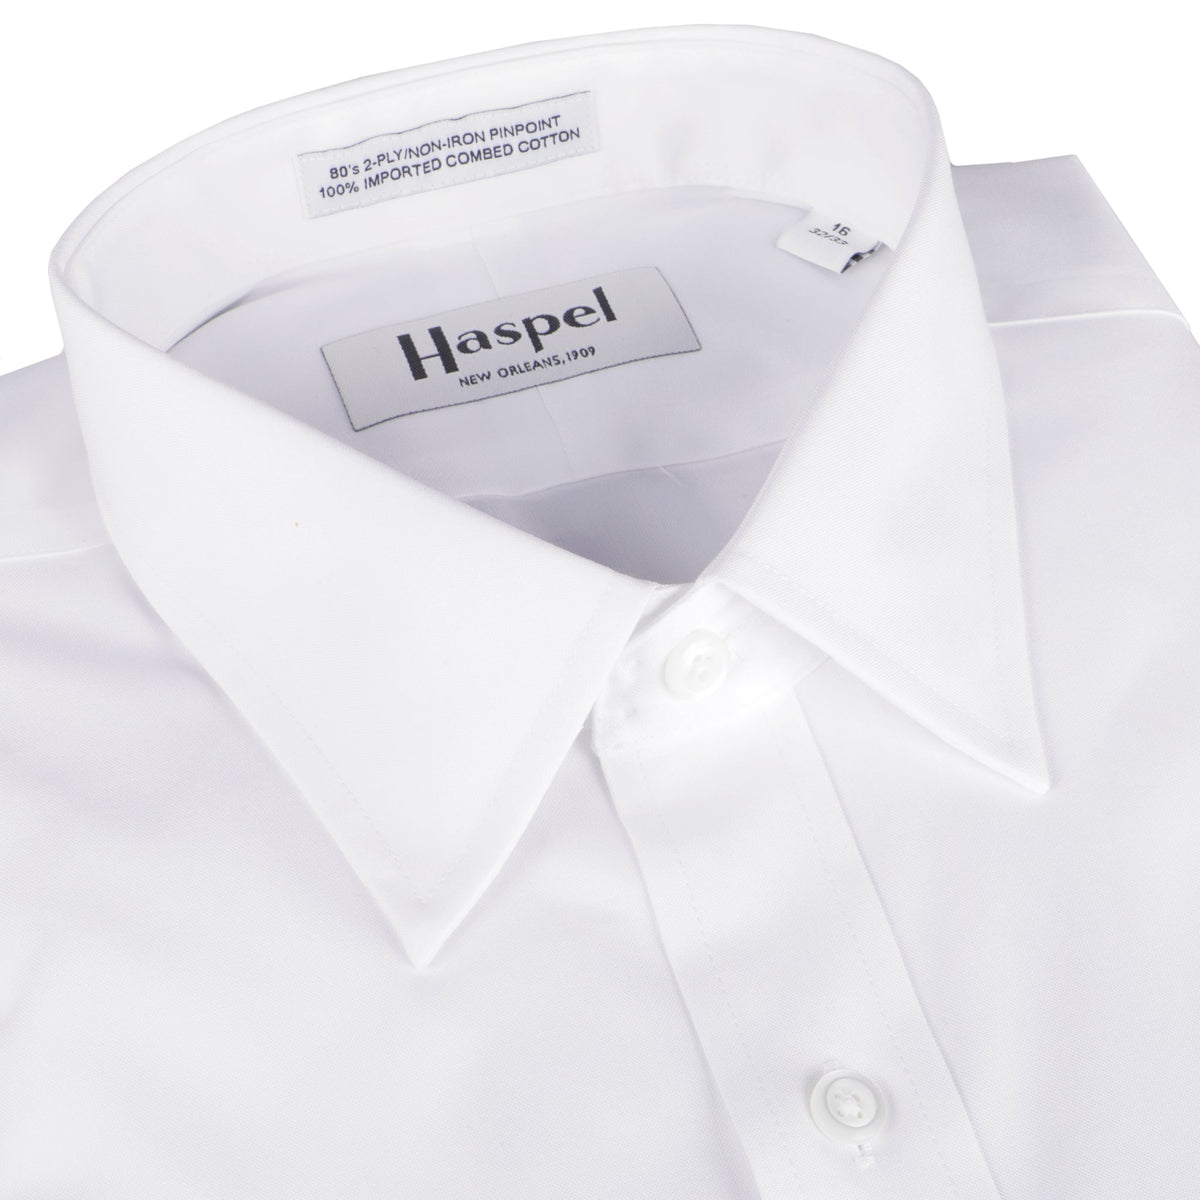 No hassle, only Haspel means no wasting time on multiple websites to complete your look. You can find all the classic men&#39;s dress shirts here that were carefully chosen to pair up with our unique, lightweight men&#39;s suits.